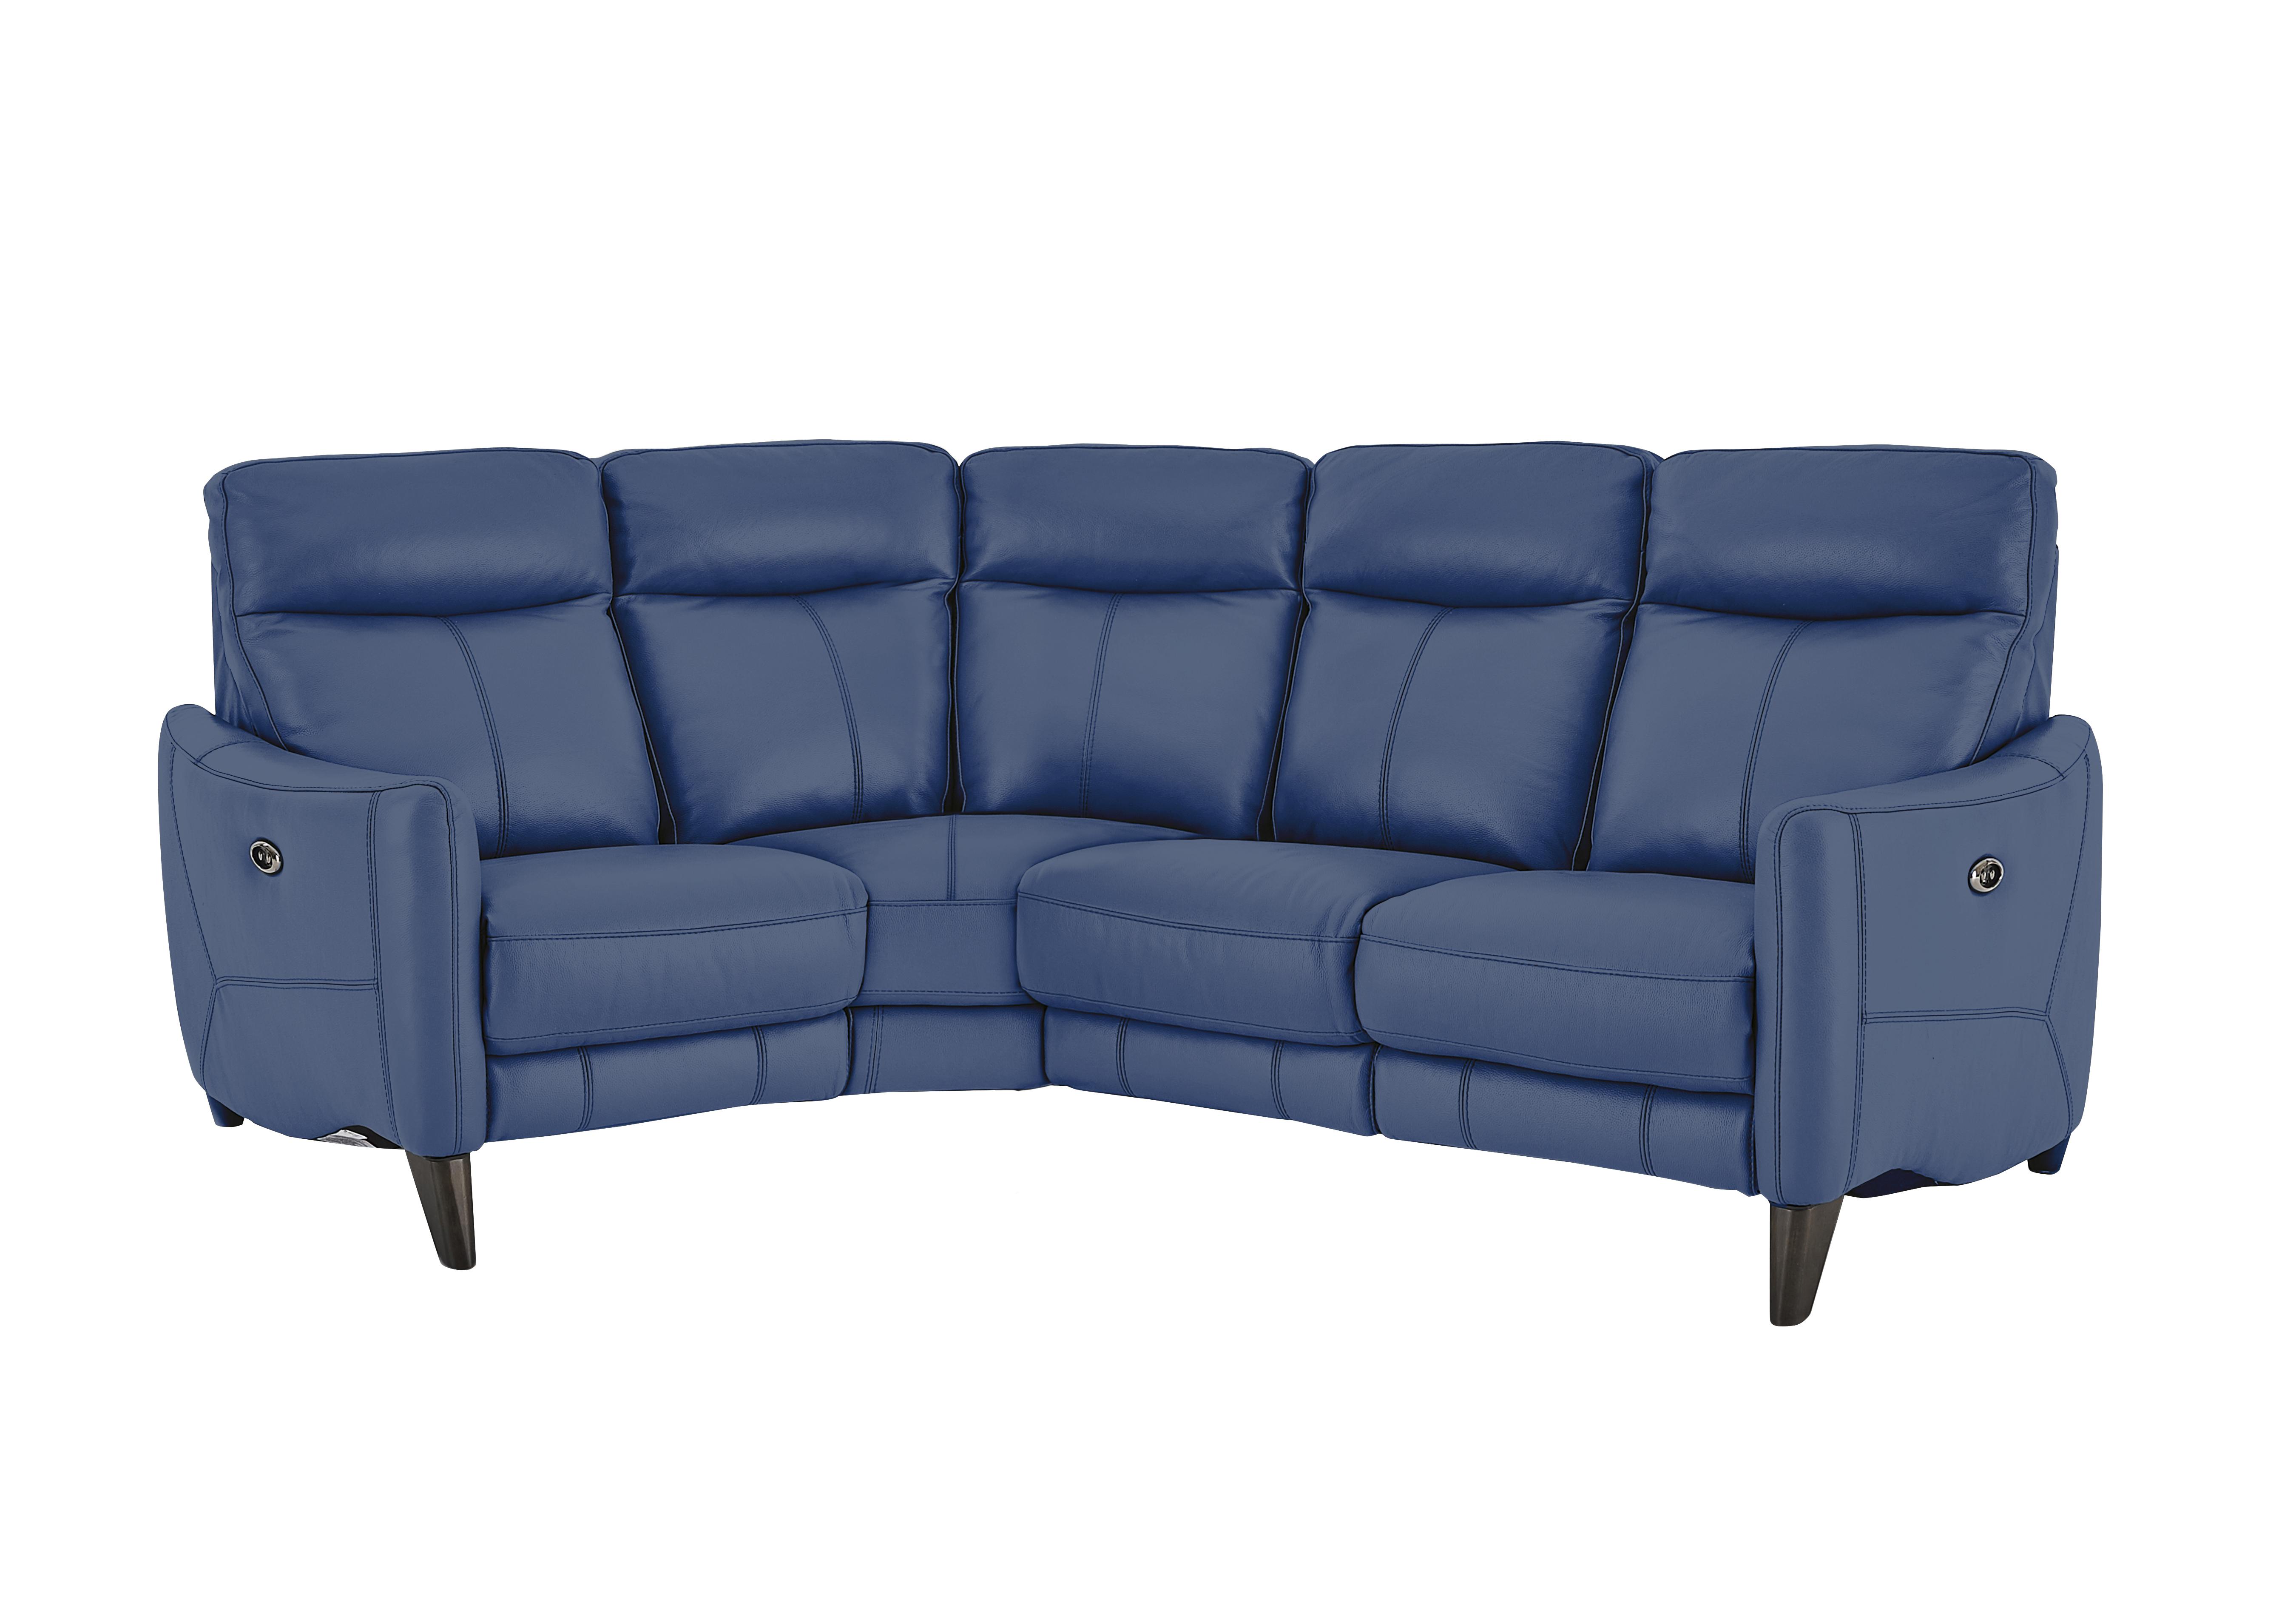 Compact Collection Petit Leather Corner Sofa in Bv-313e Ocean Blue on Furniture Village